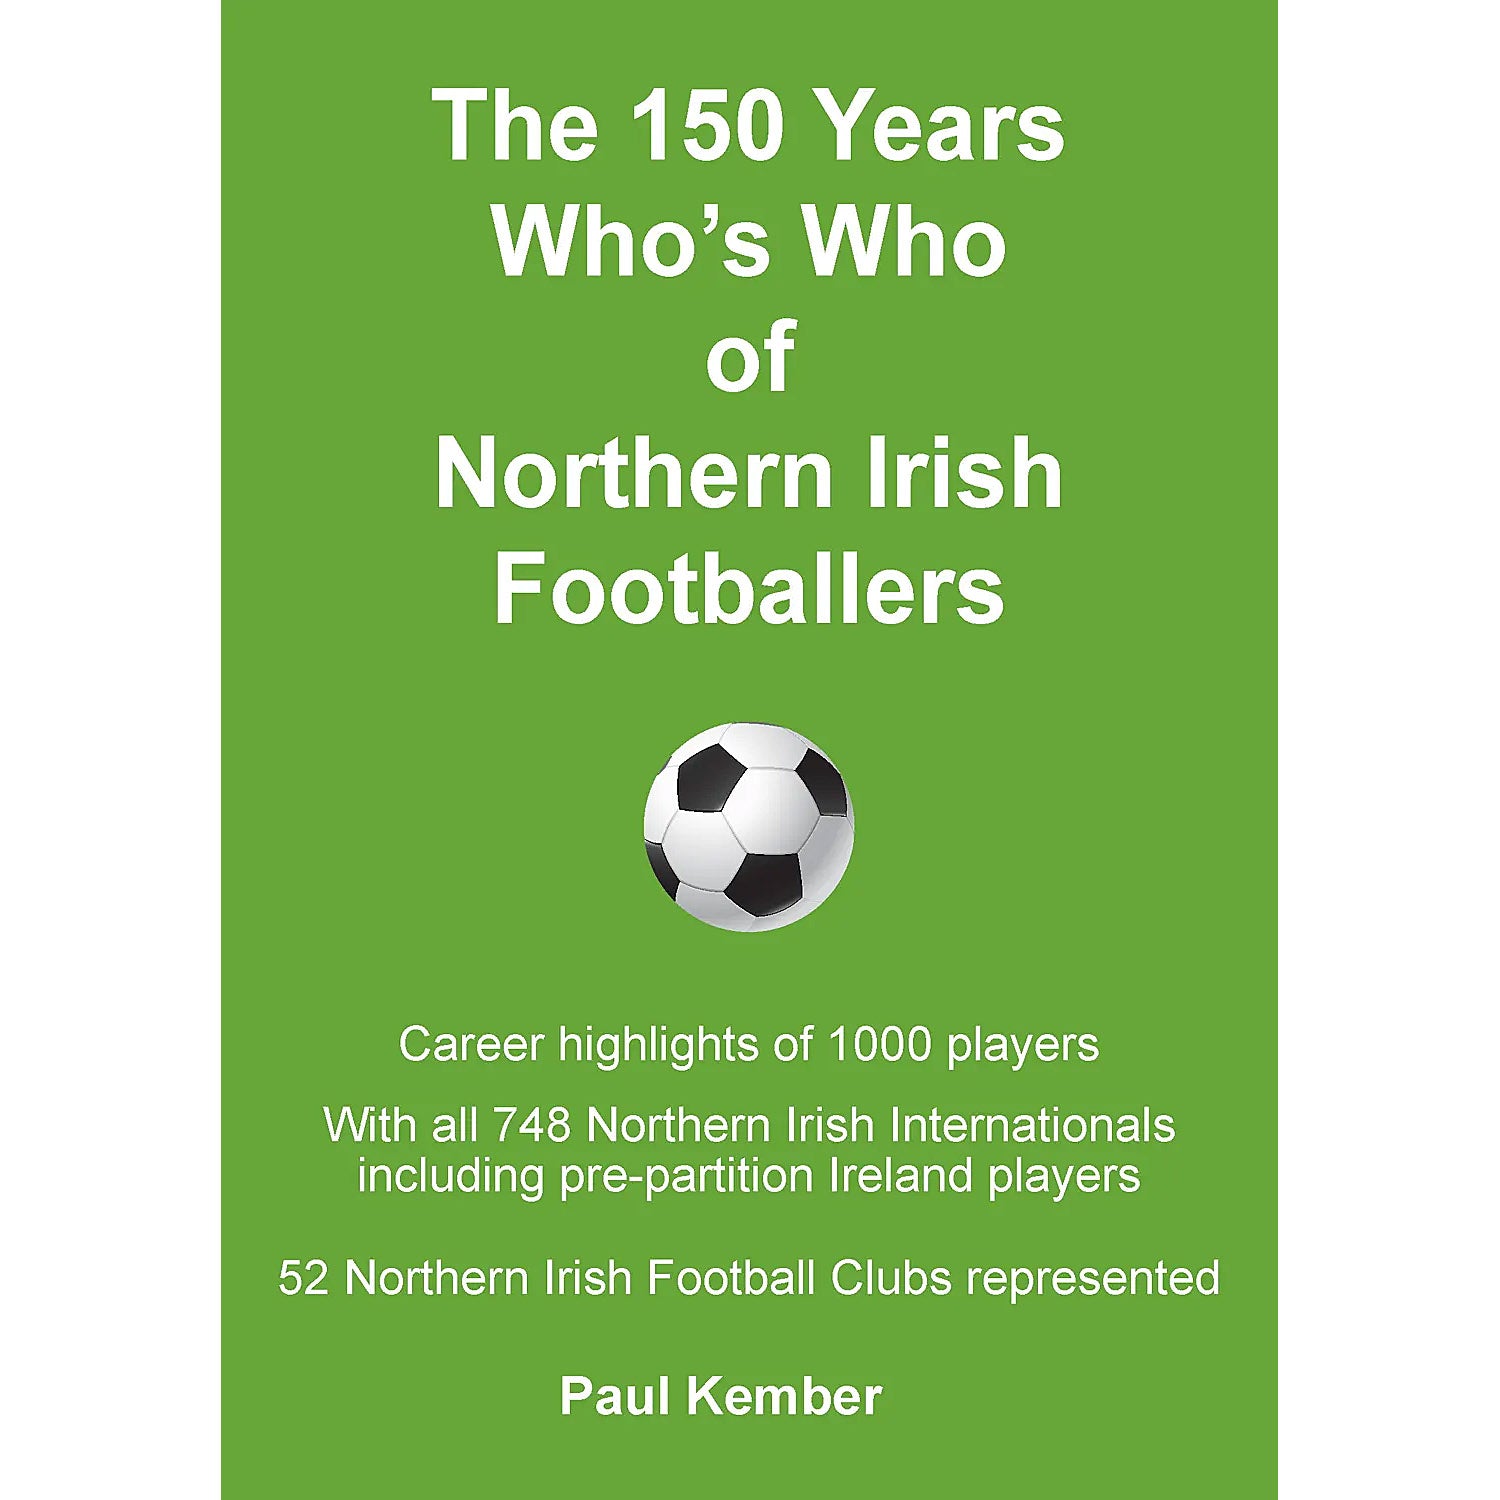 The 150 Years Who's Who of Northern Irish Footballers